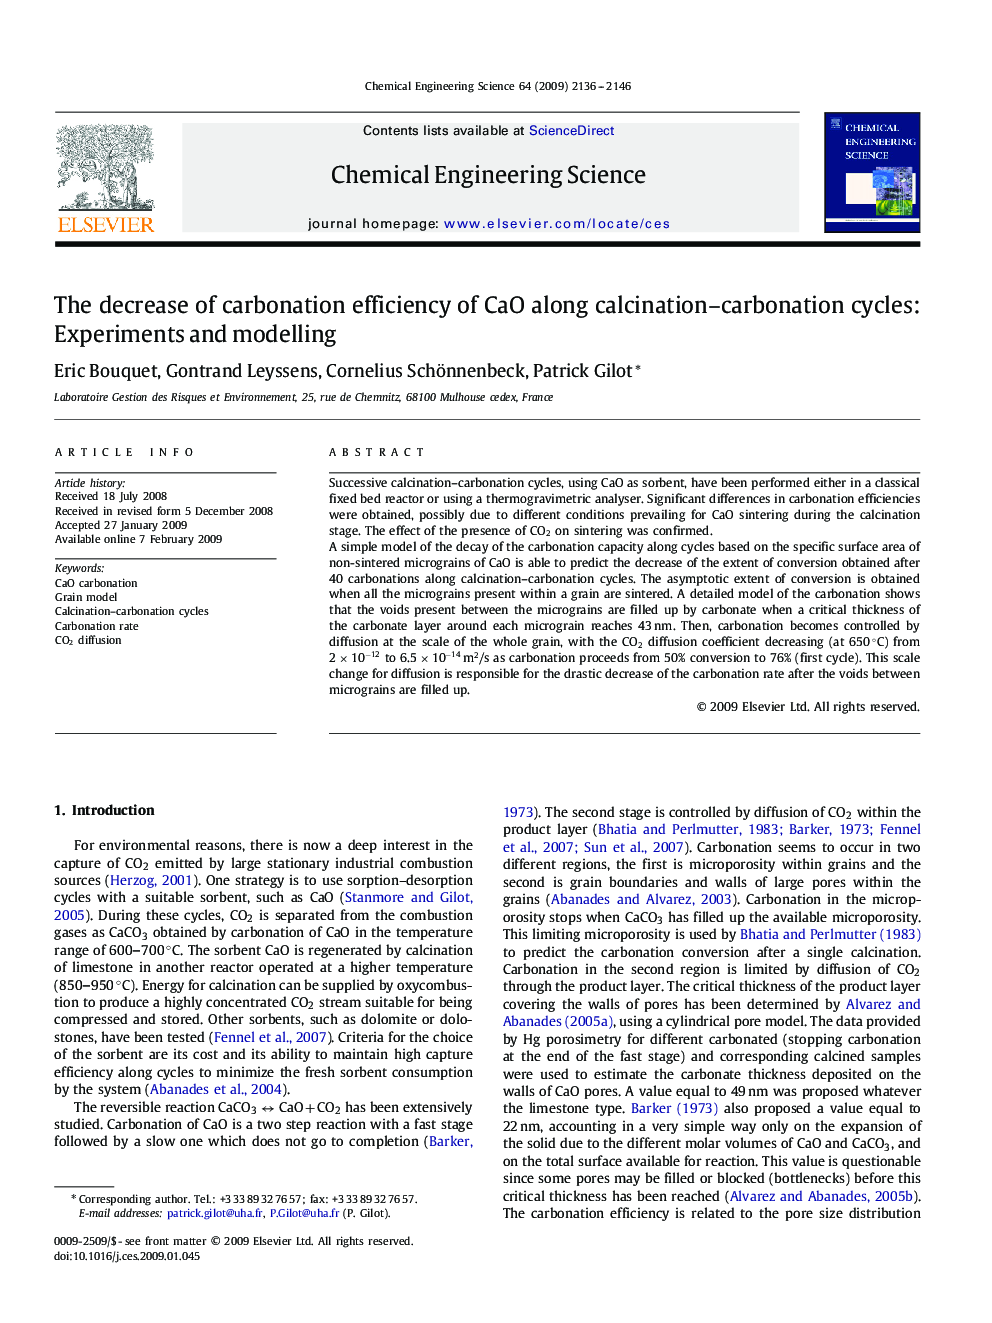 The decrease of carbonation efficiency of CaO along calcination–carbonation cycles: Experiments and modelling